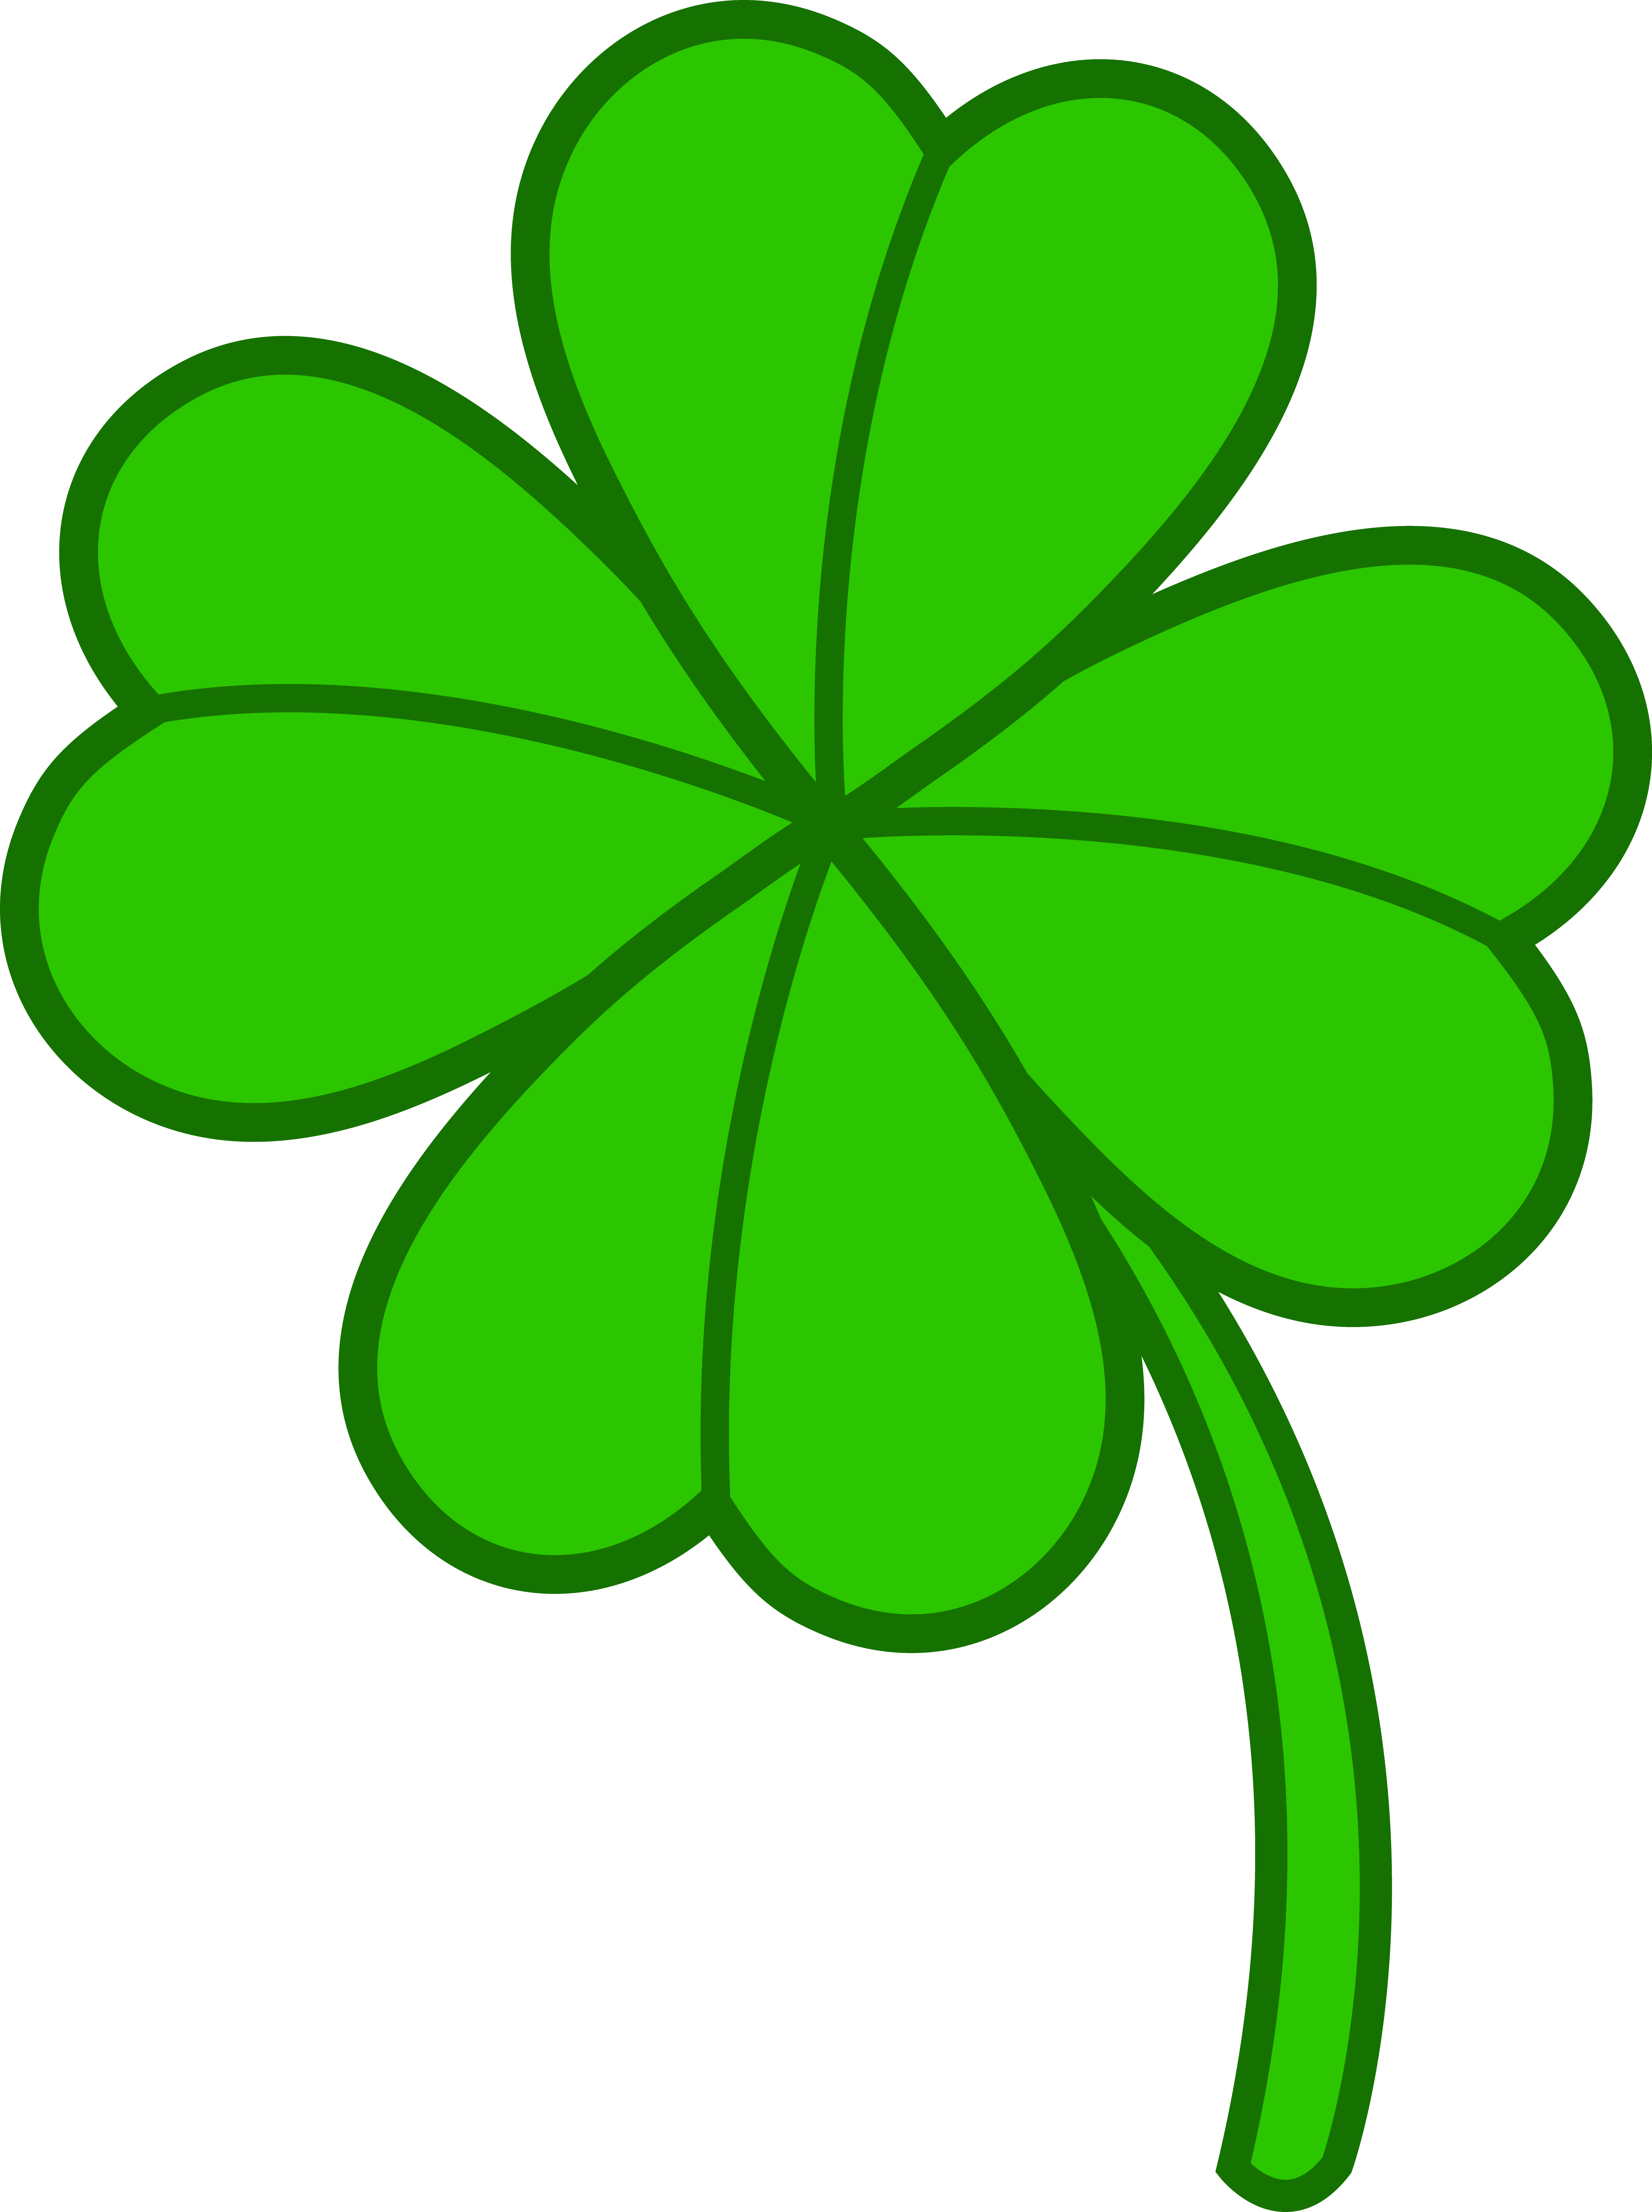 Free Four Leaf Clover Image, Download Free Clip Art, Free Clip Art on Clipart Library